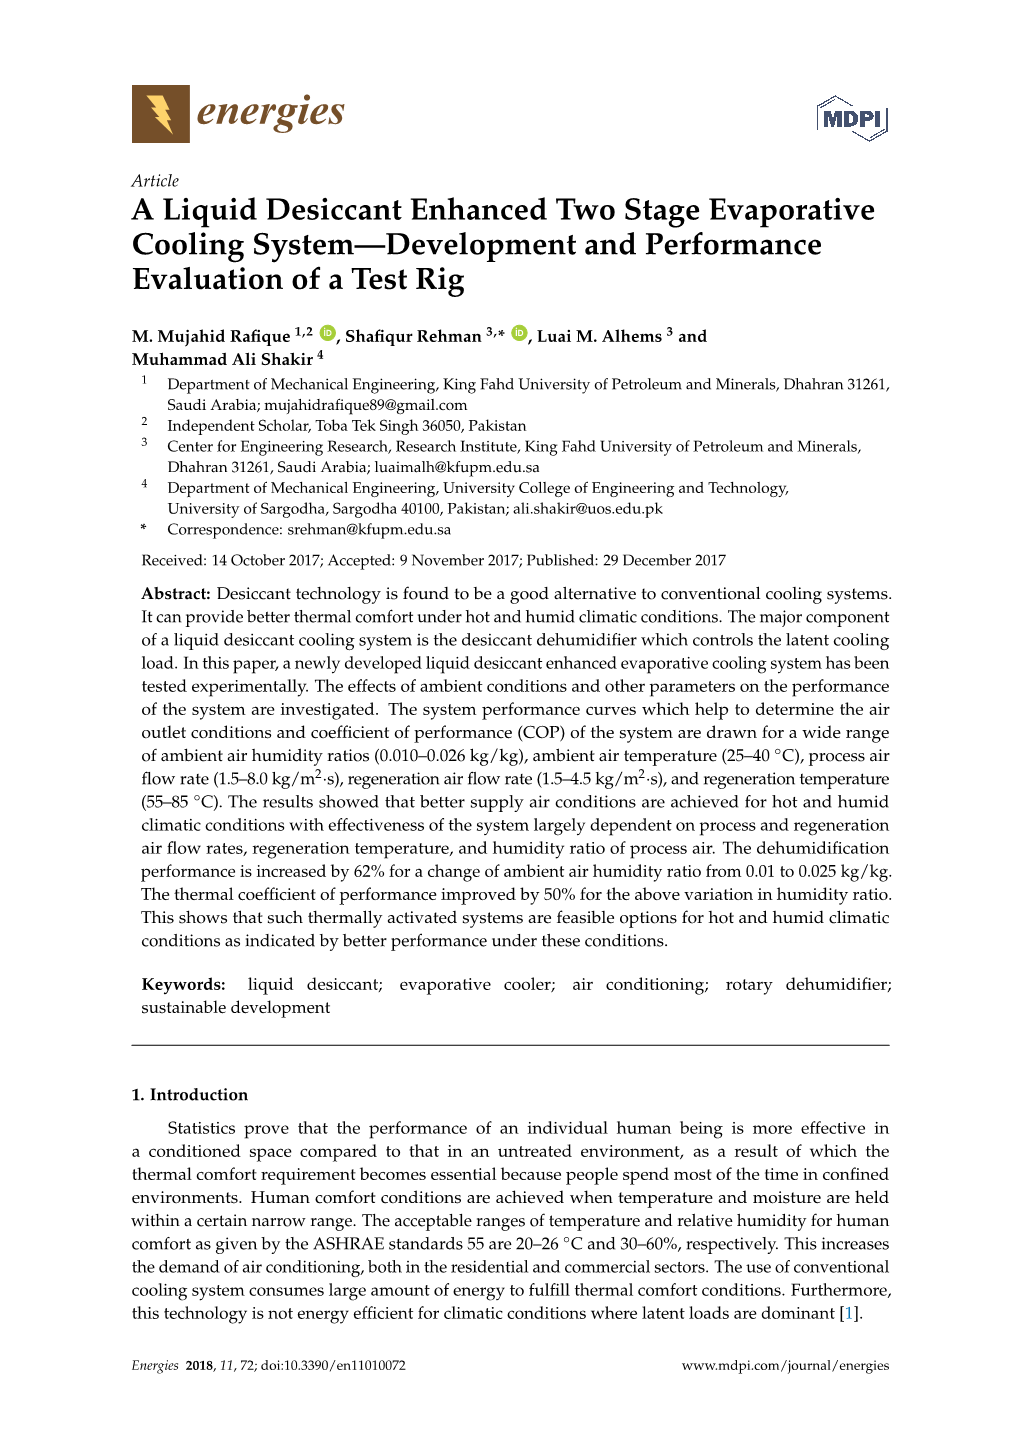 A Liquid Desiccant Enhanced Two Stage Evaporative Cooling System—Development and Performance Evaluation of a Test Rig